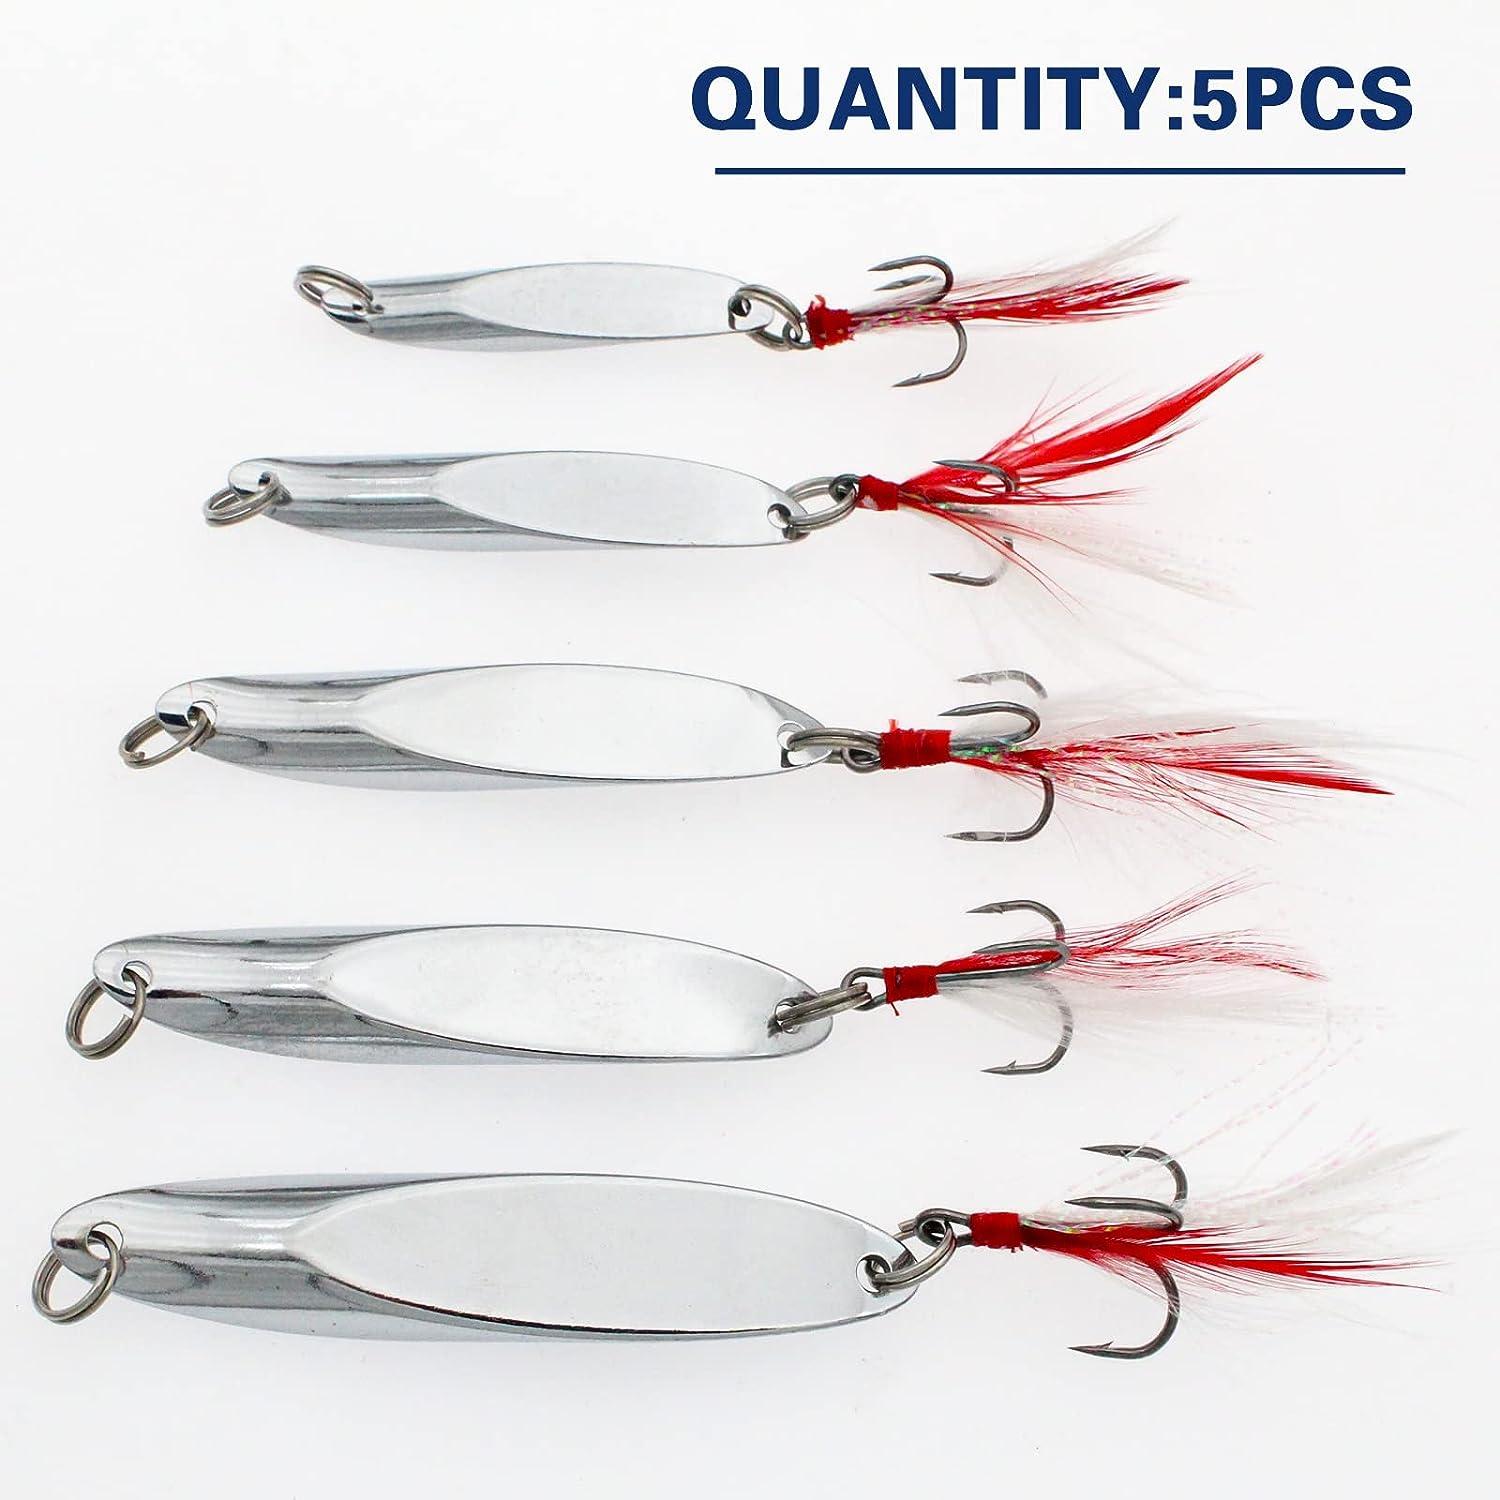 Zsrivk 5 Sizes Fishing Spoons Lures Hard Metal Baits for